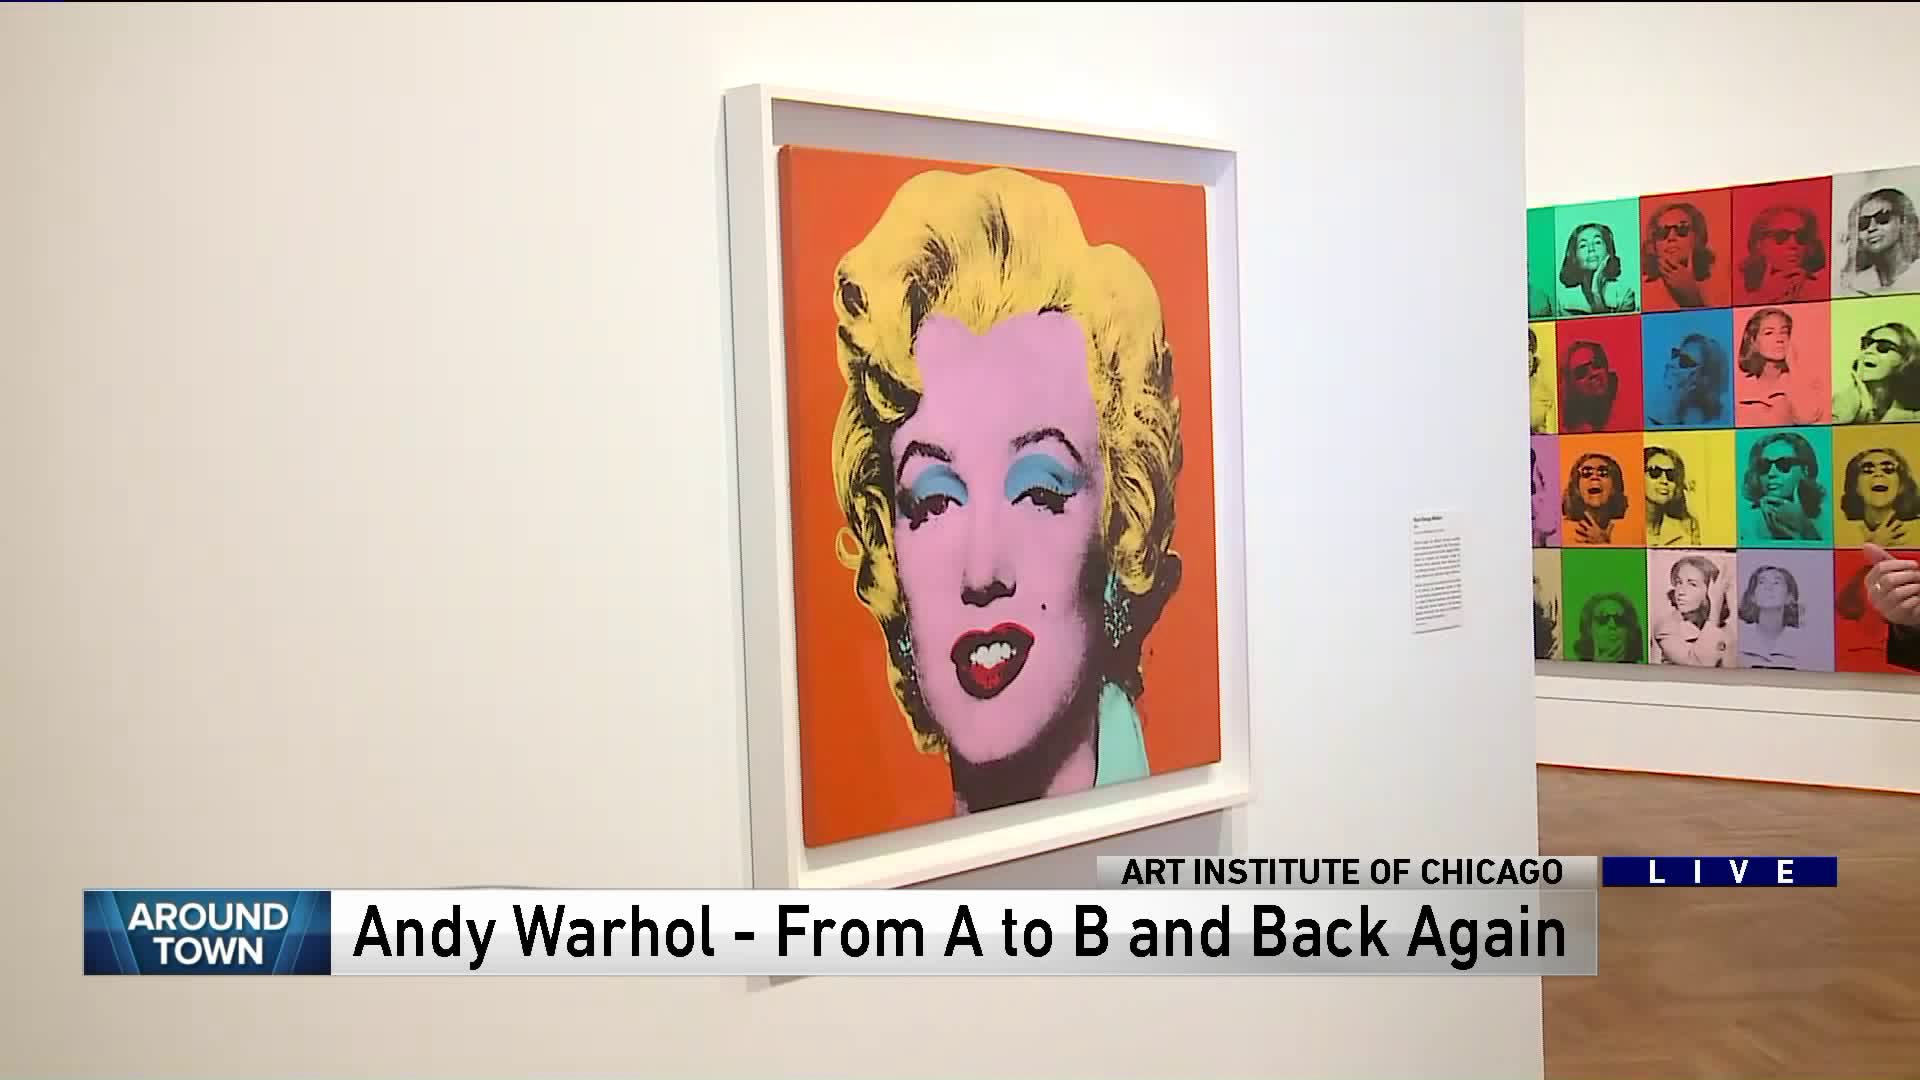 Around Town previews the ‘Andy Warhol – From A to B and Back Again’ exhibition